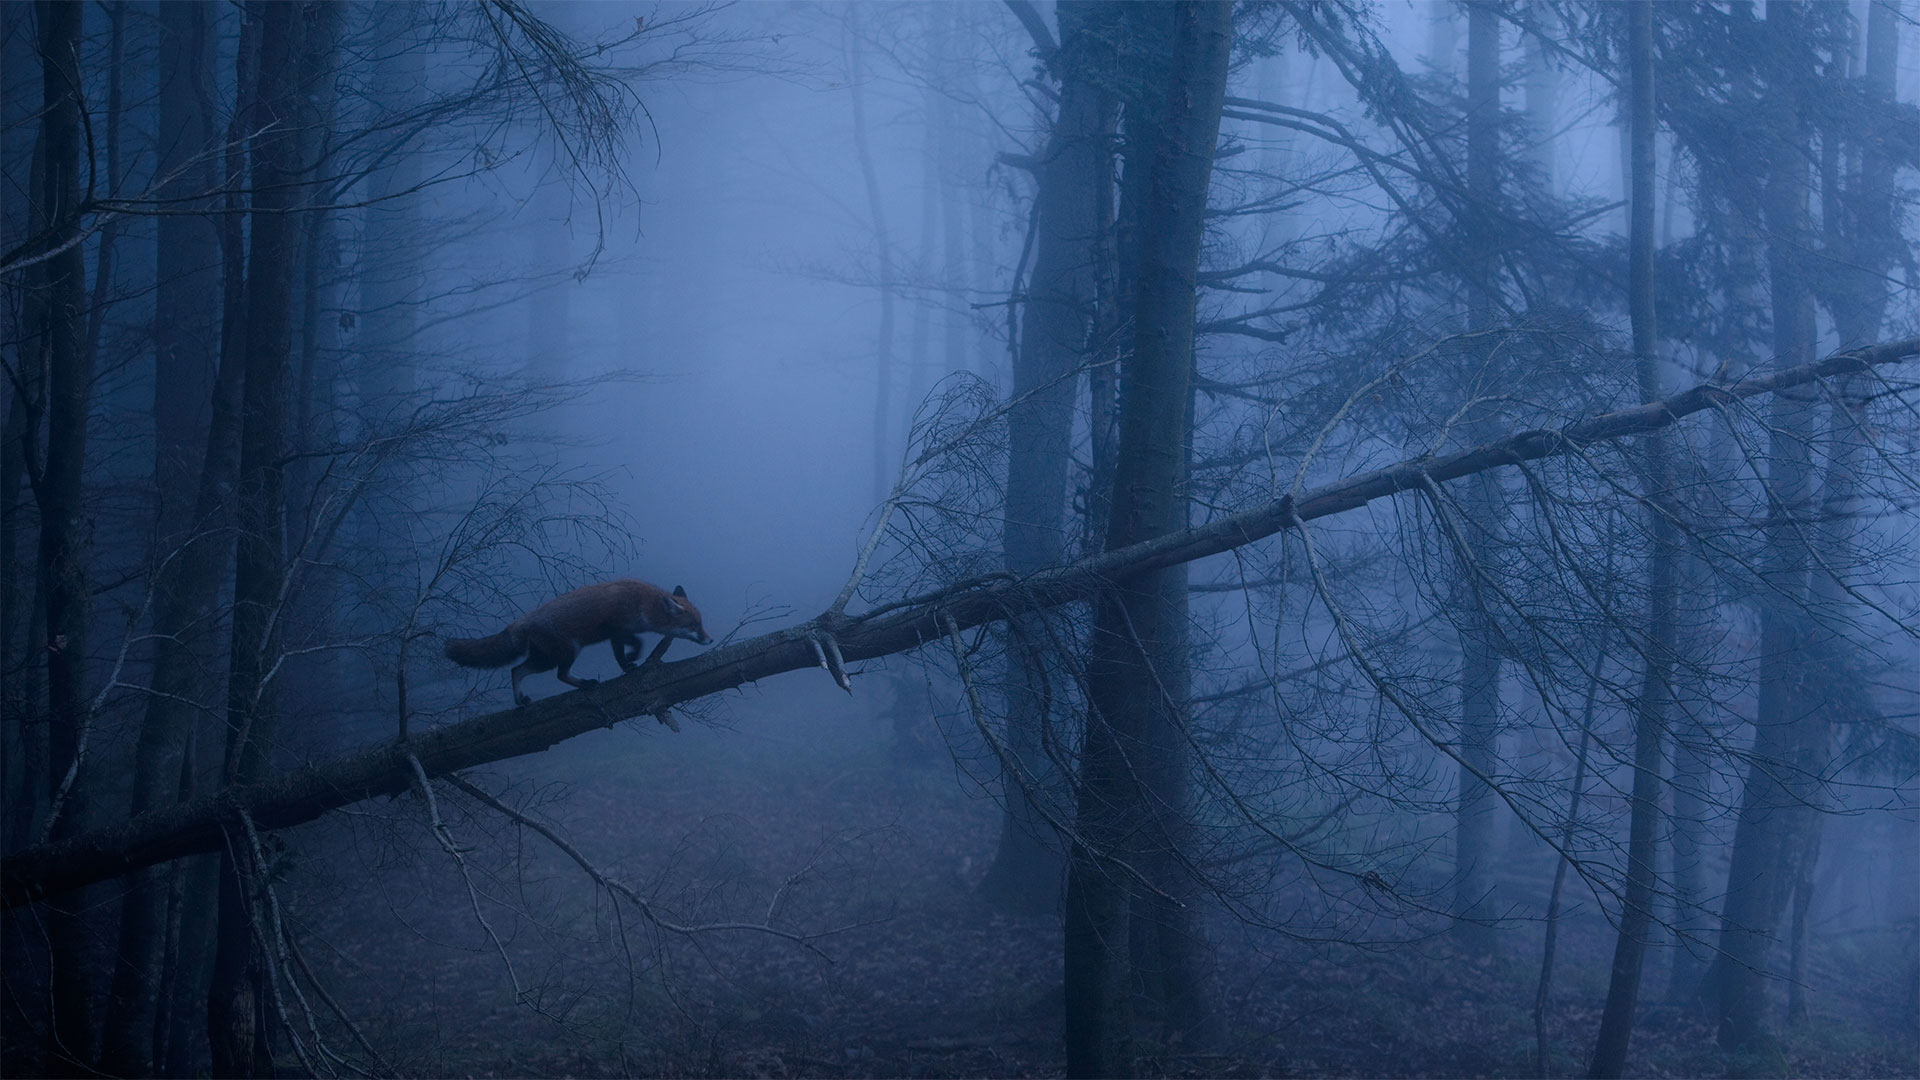 Red fox in the Black Forest of Germany - Klaus Echle